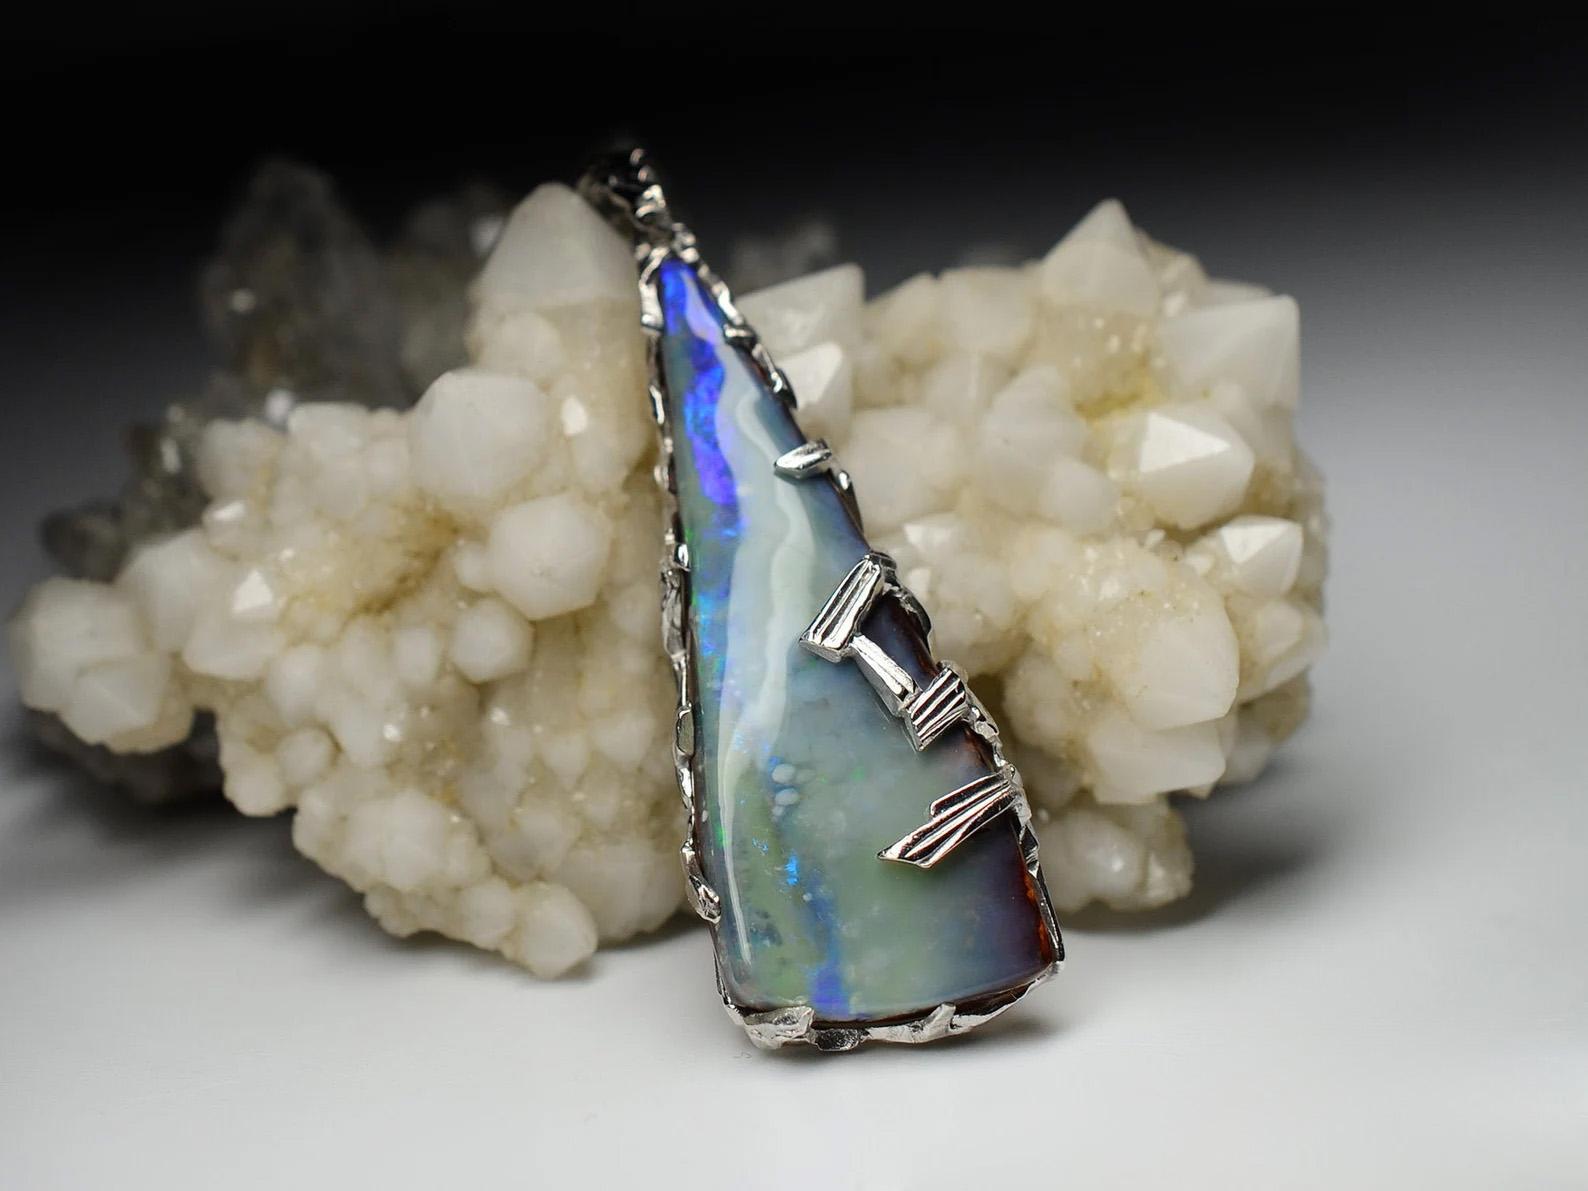 Silver pendant with natural Boulder Opal 
opal origin - Australia
opal measurements - 0.16 x 3,94 x 1,57 in / 4 x 15 x 40 mm
stone weight - 22.70 carat
pendant lenght - 51 mm
pendant weight - 7.78 grams